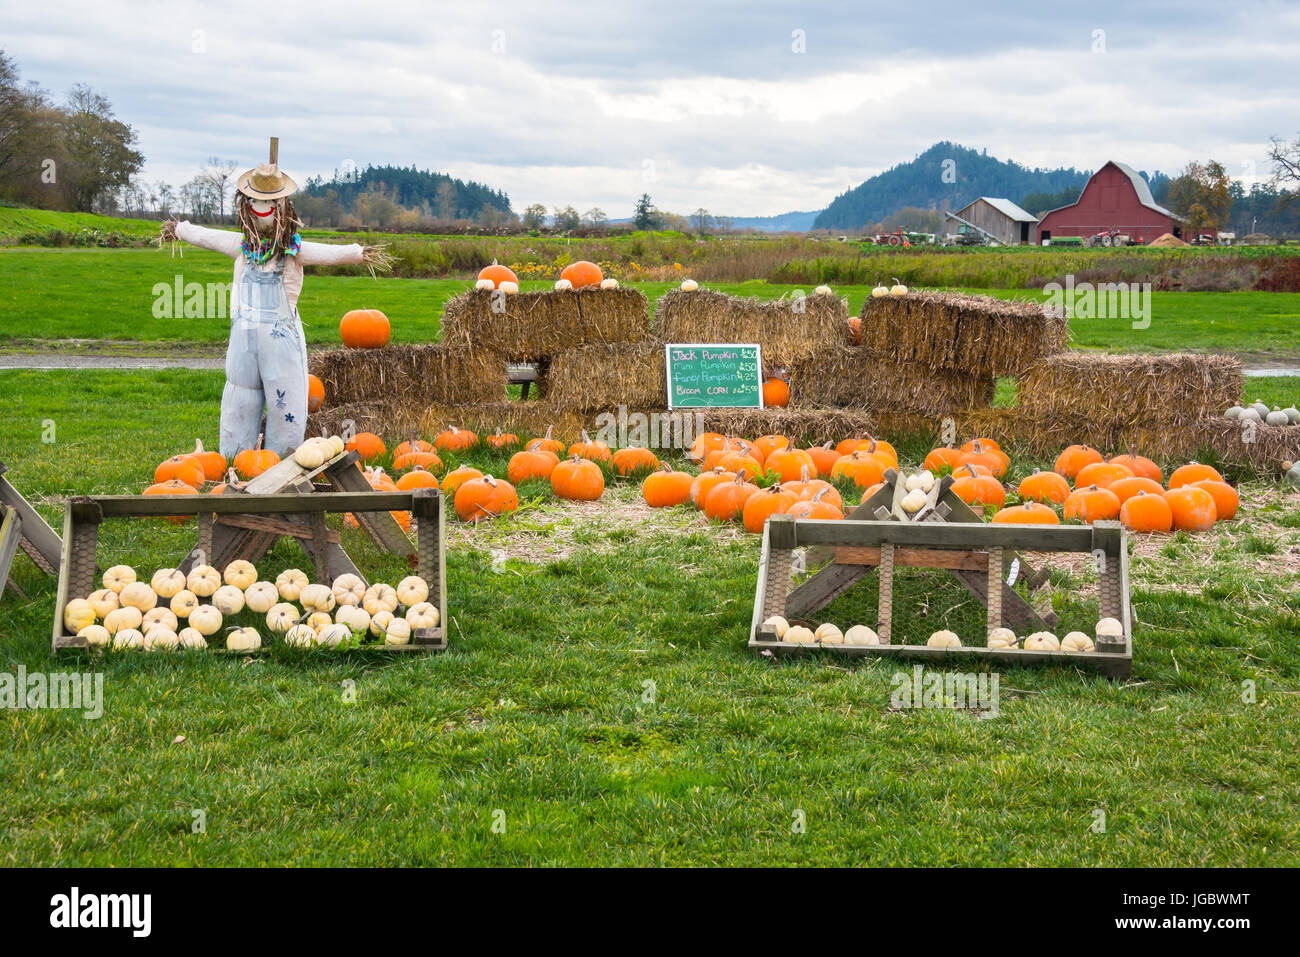 Pumpkins for Sale Displayed at Farm Roadside Stand in Halloween Display with Scarecrow and Bales of Hay Stock Photo